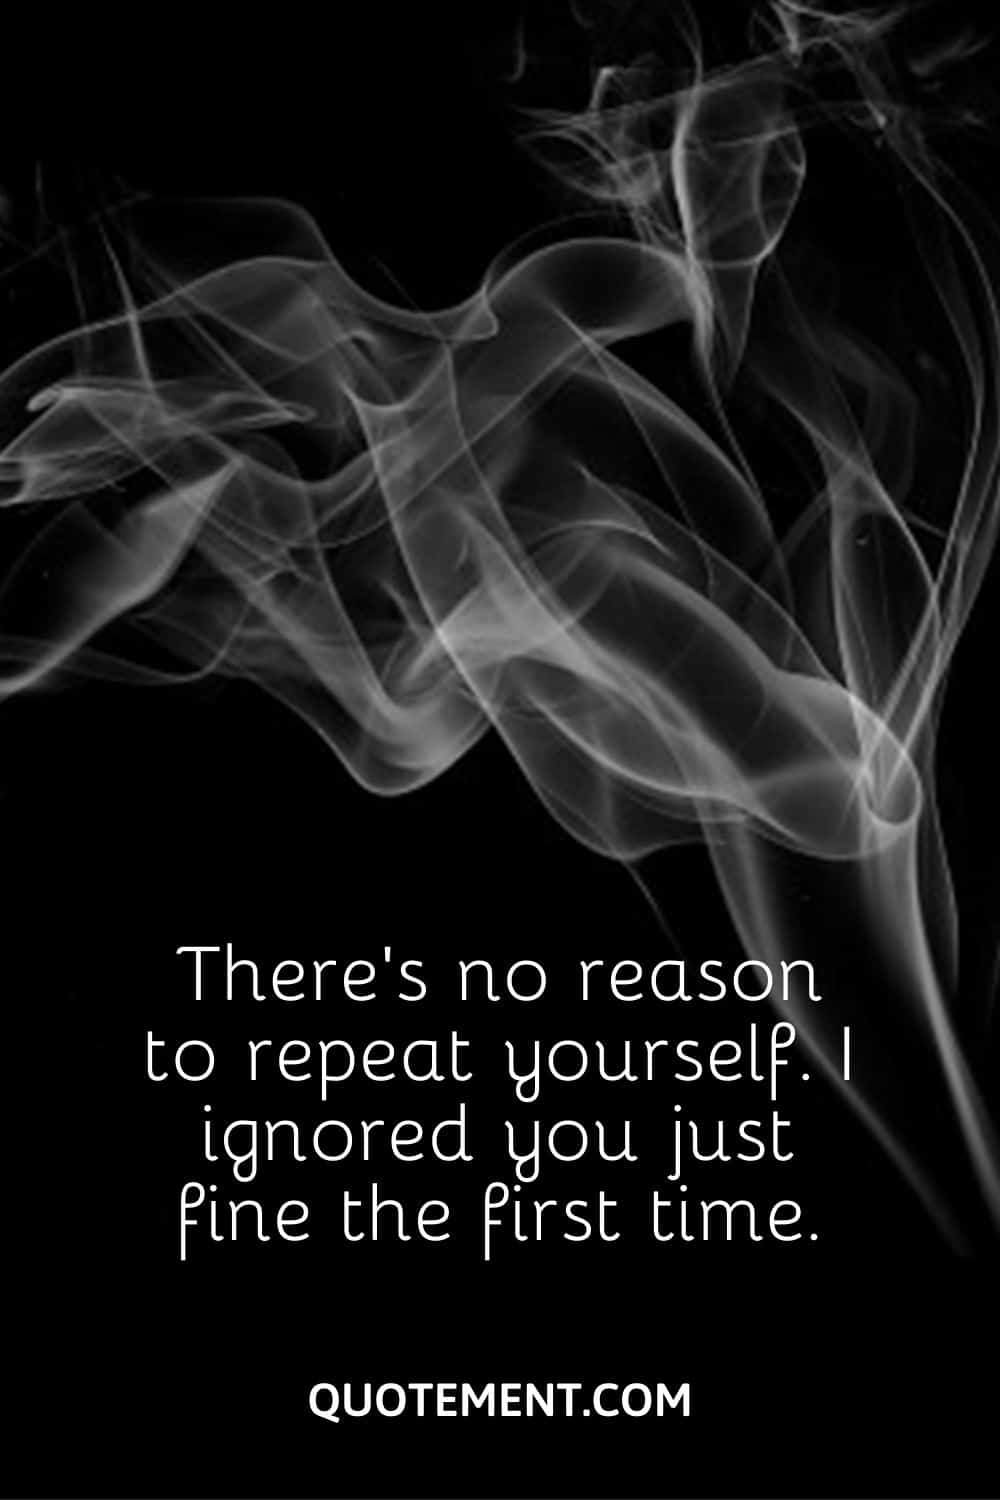 There’s no reason to repeat yourself